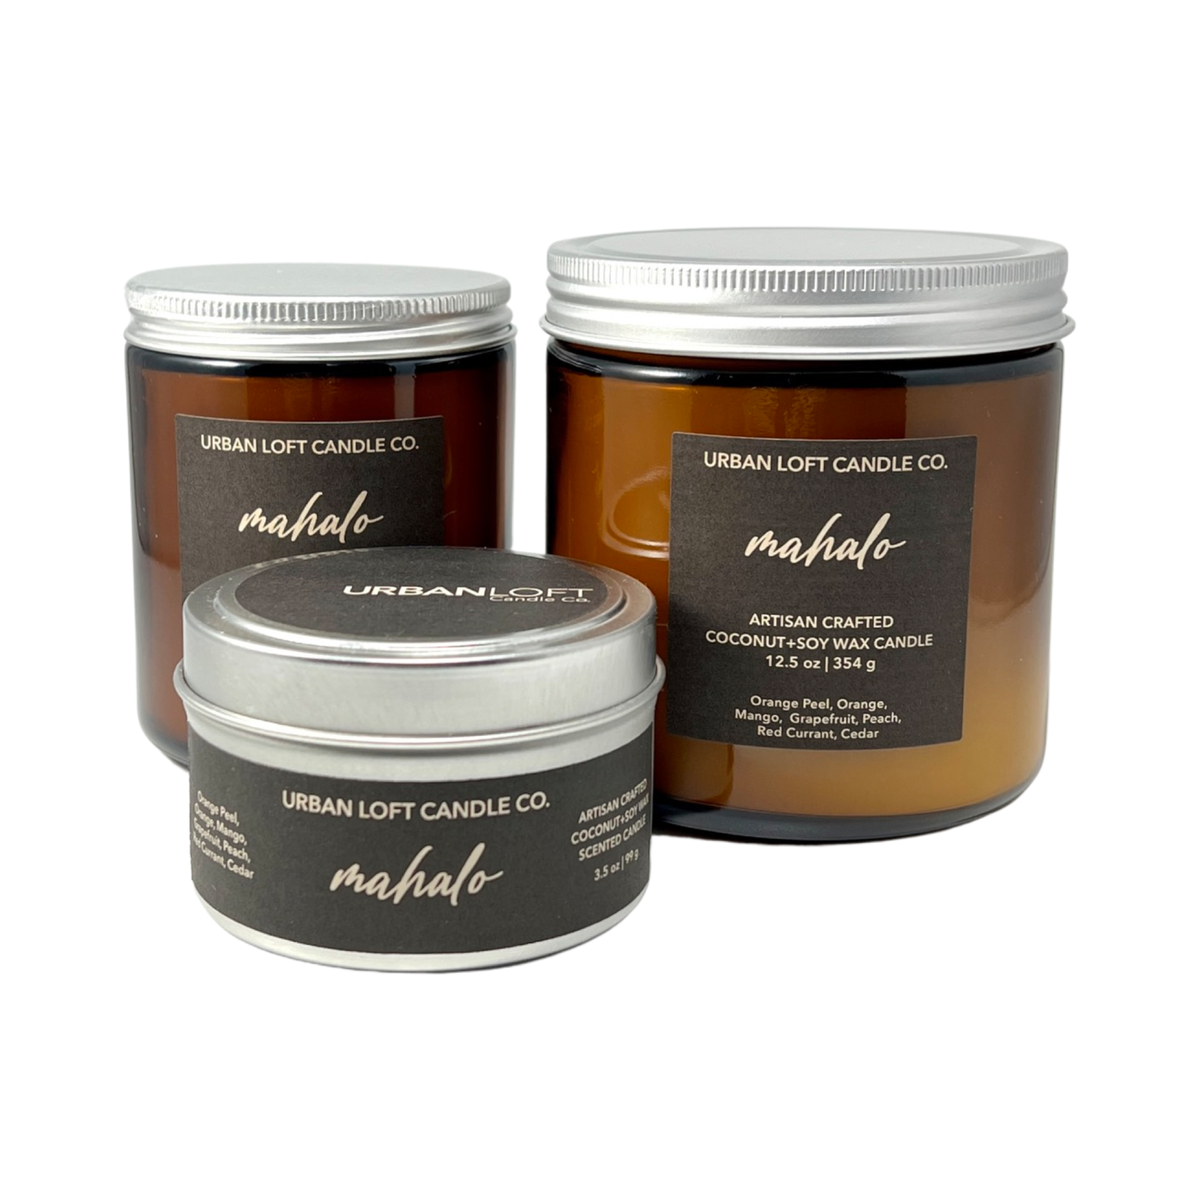 Urban Loft Candle Co. Mahalo Scented Candle Collection